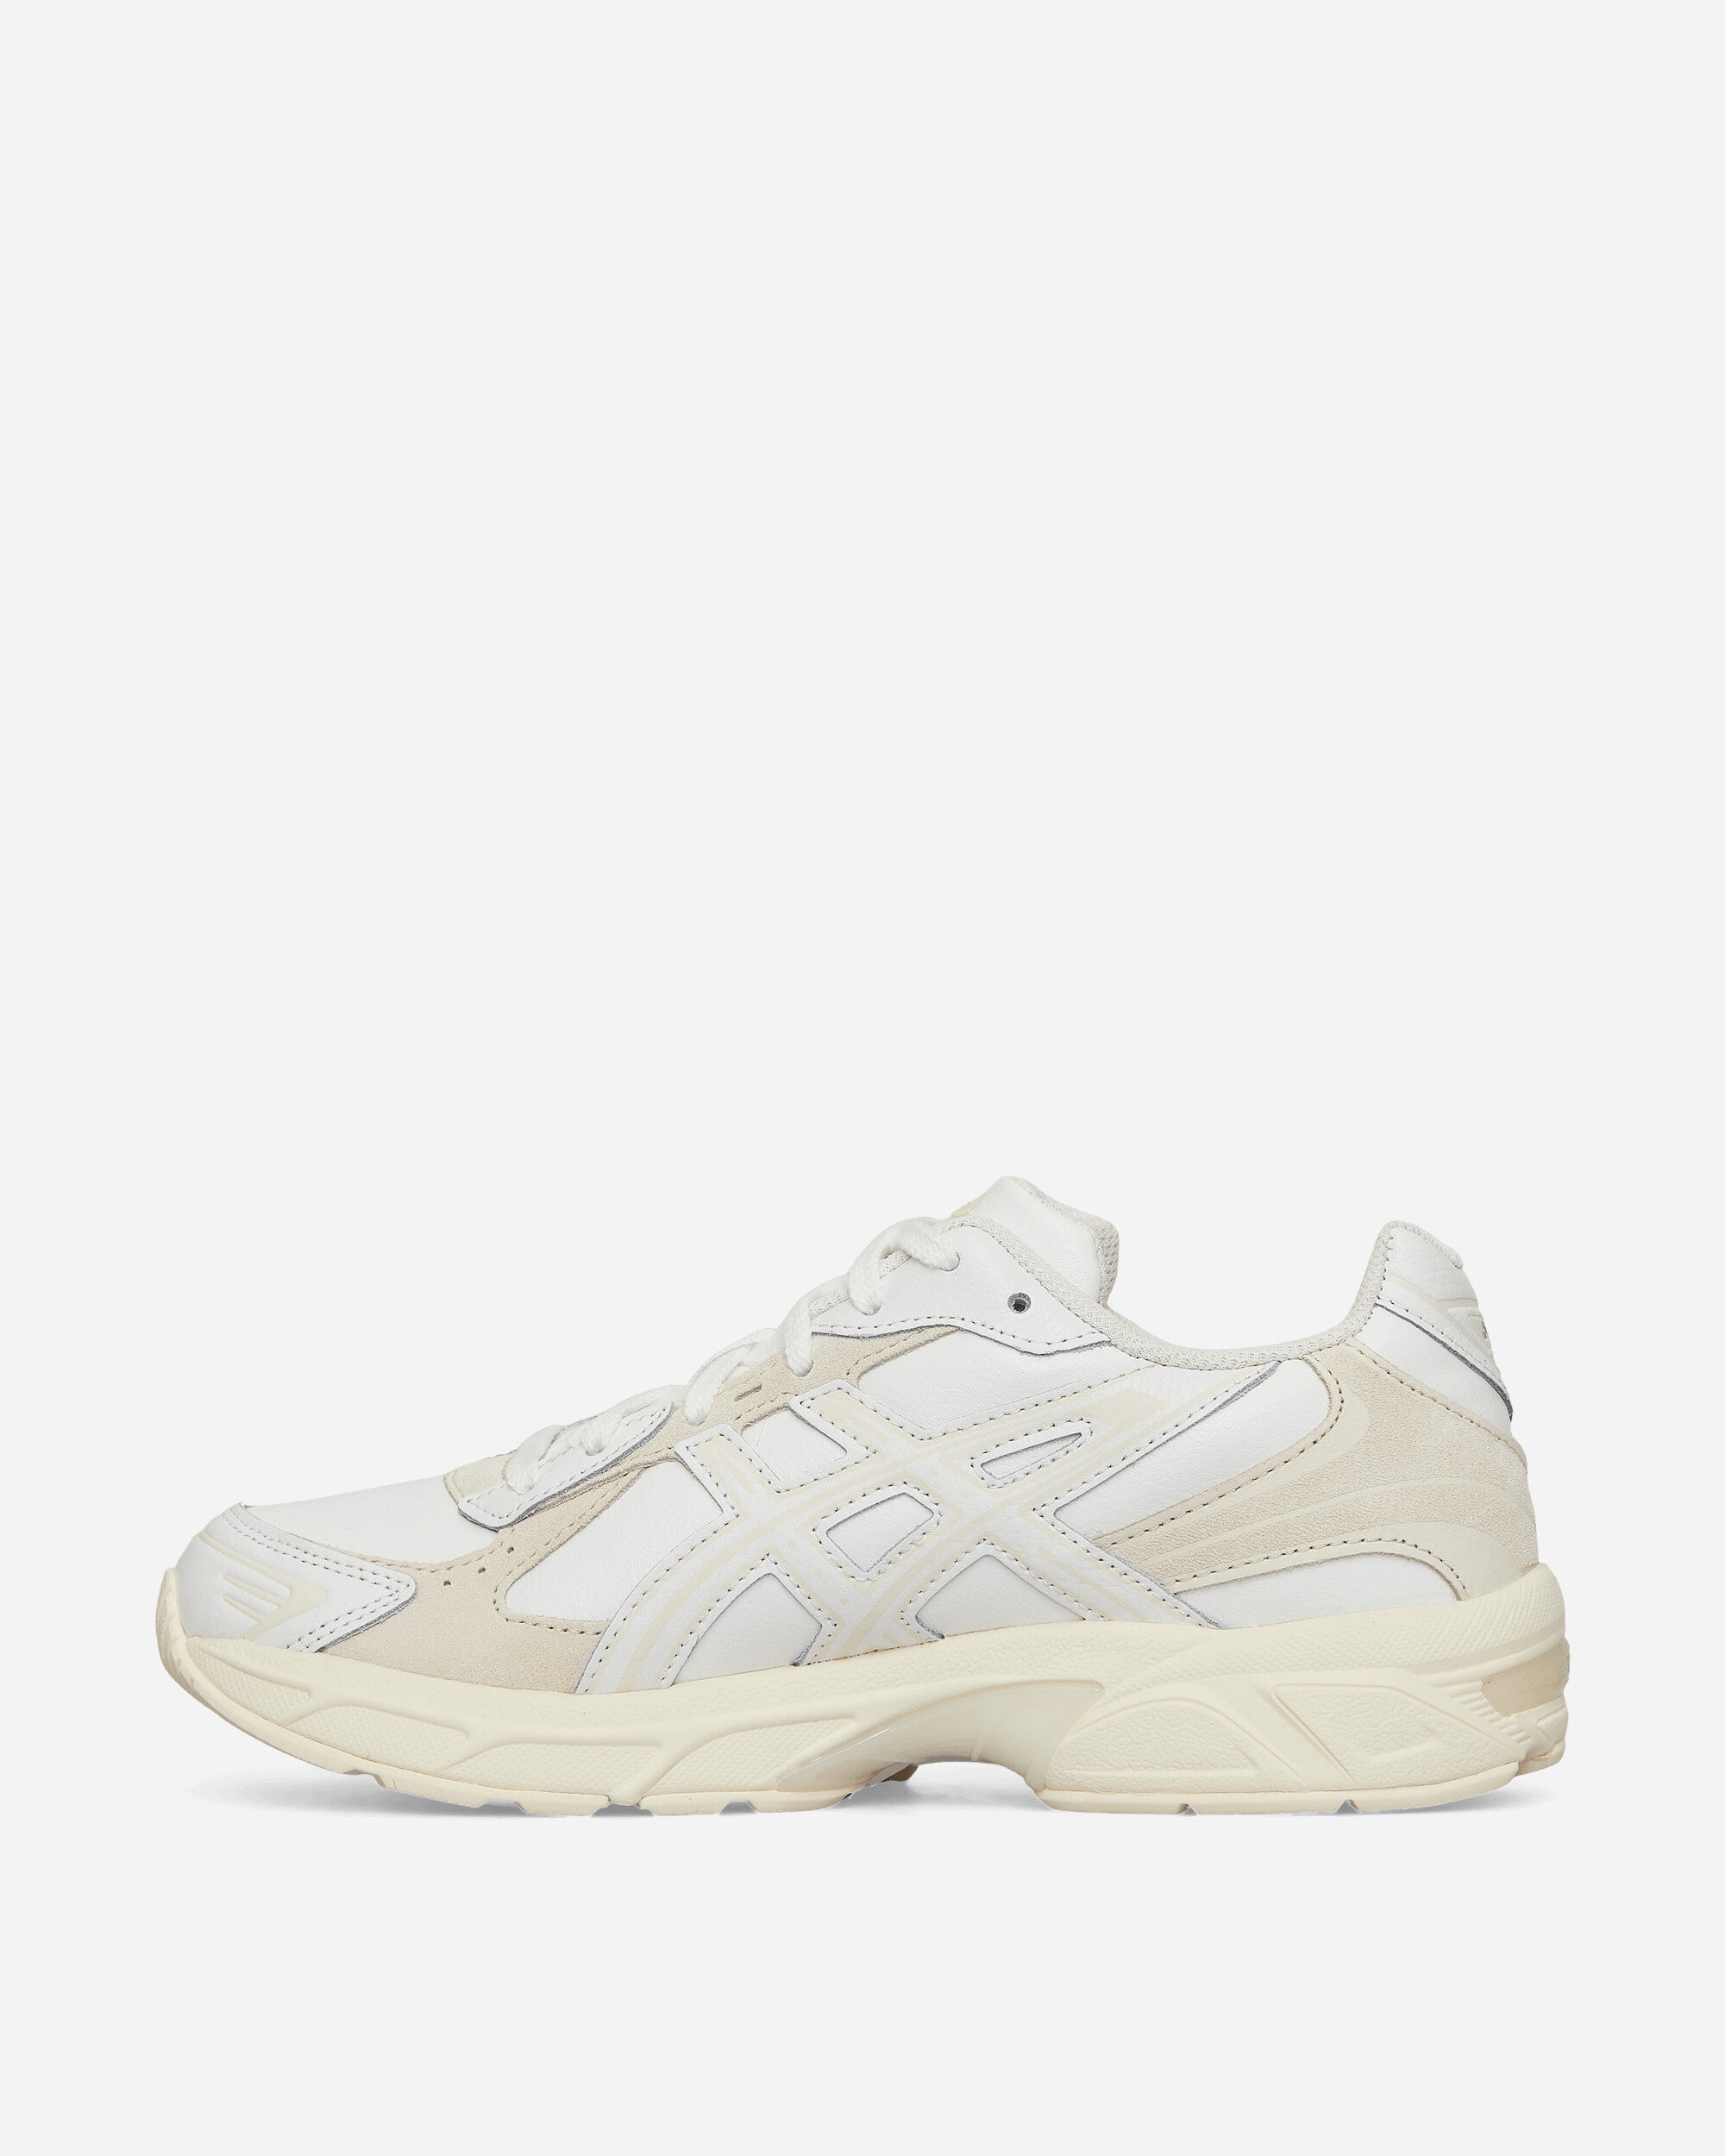 Asics Gel 1130 White/Cream Sneakers Low 1201A844-100